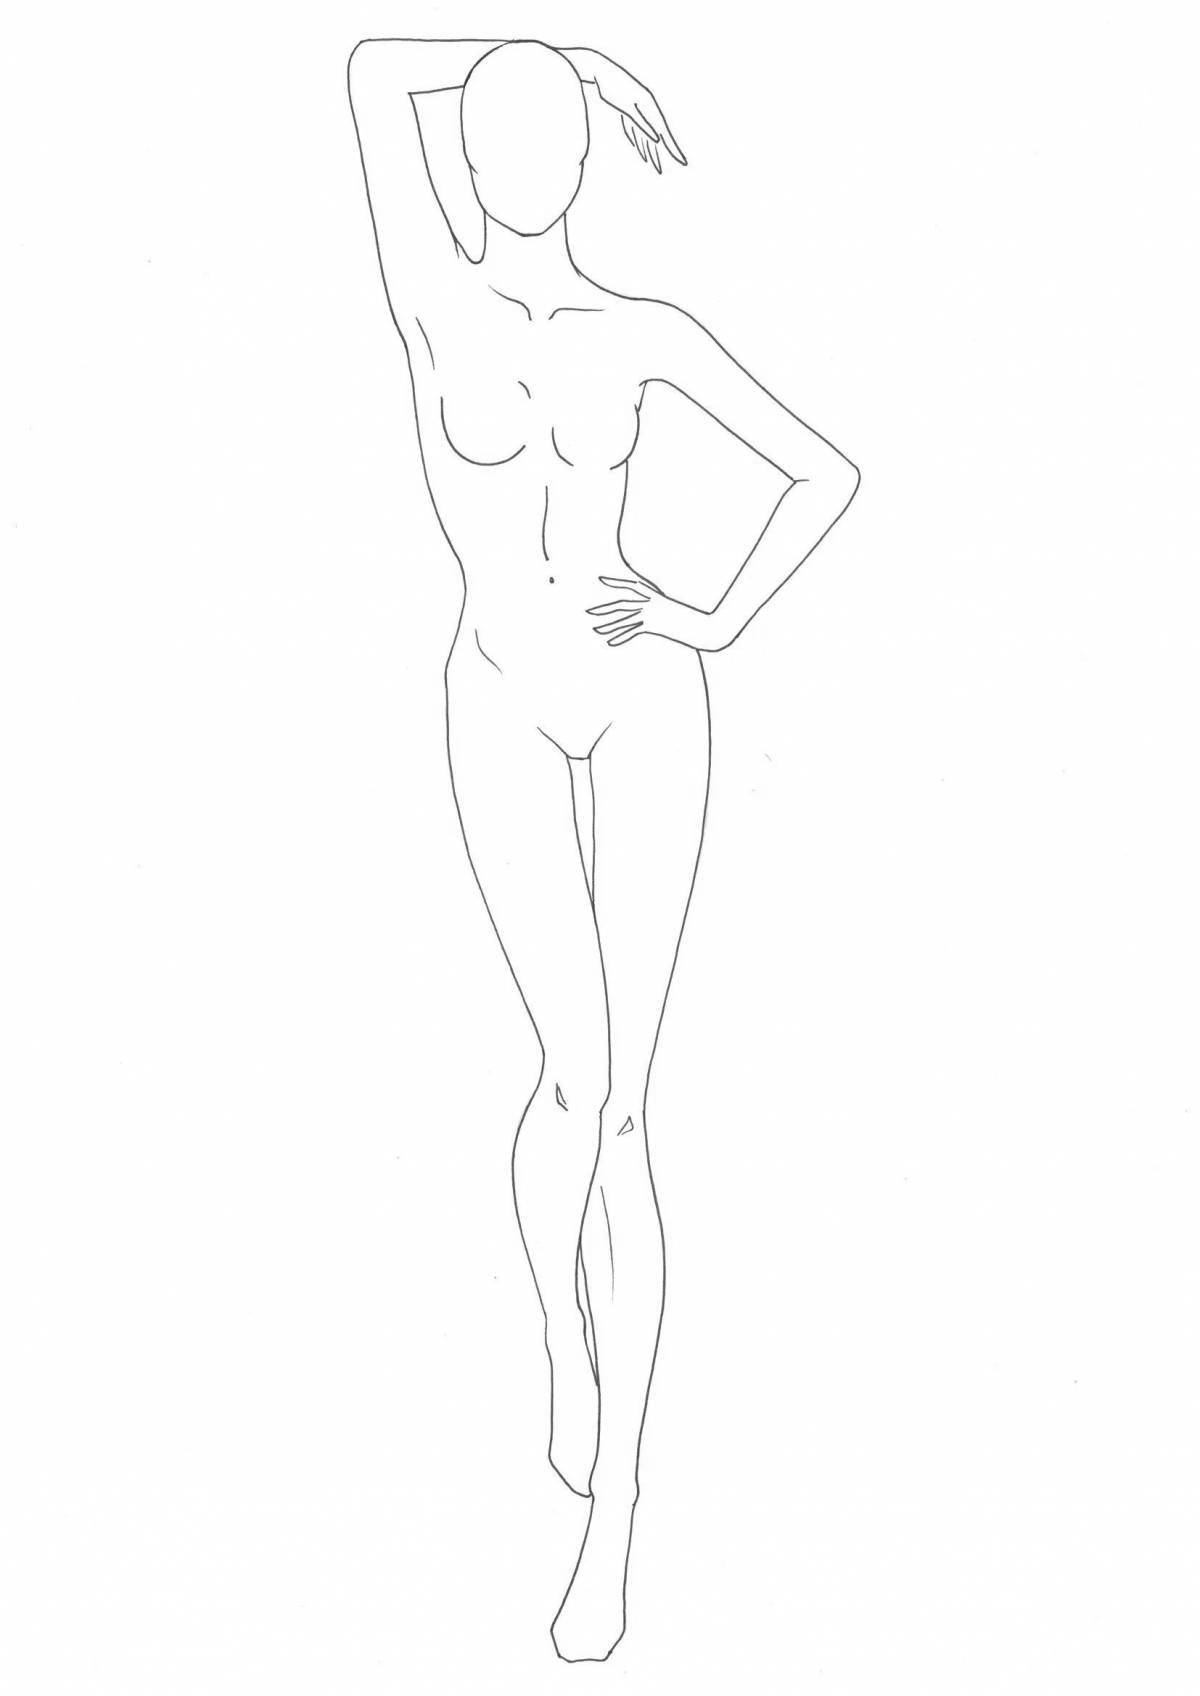 Coloring page of a joyful mannequin girl